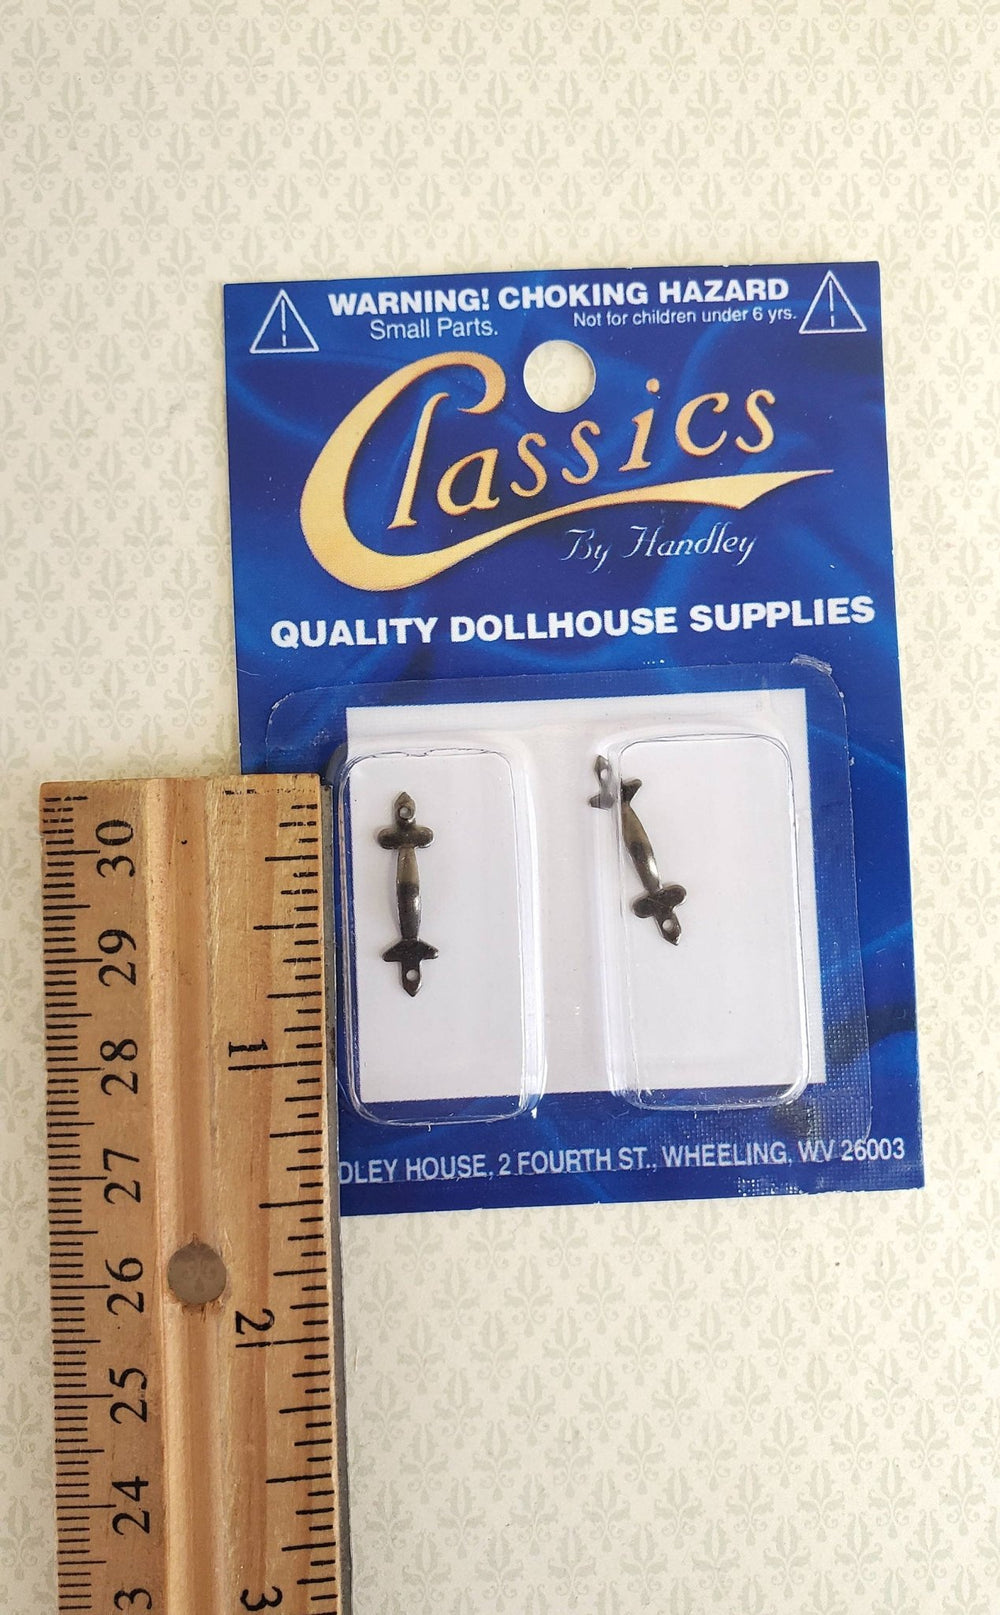 Dollhouse Miniature Drawer Pulls or Door Handles x2 Pewter 1:12 Scale Tudor Style - Miniature Crush